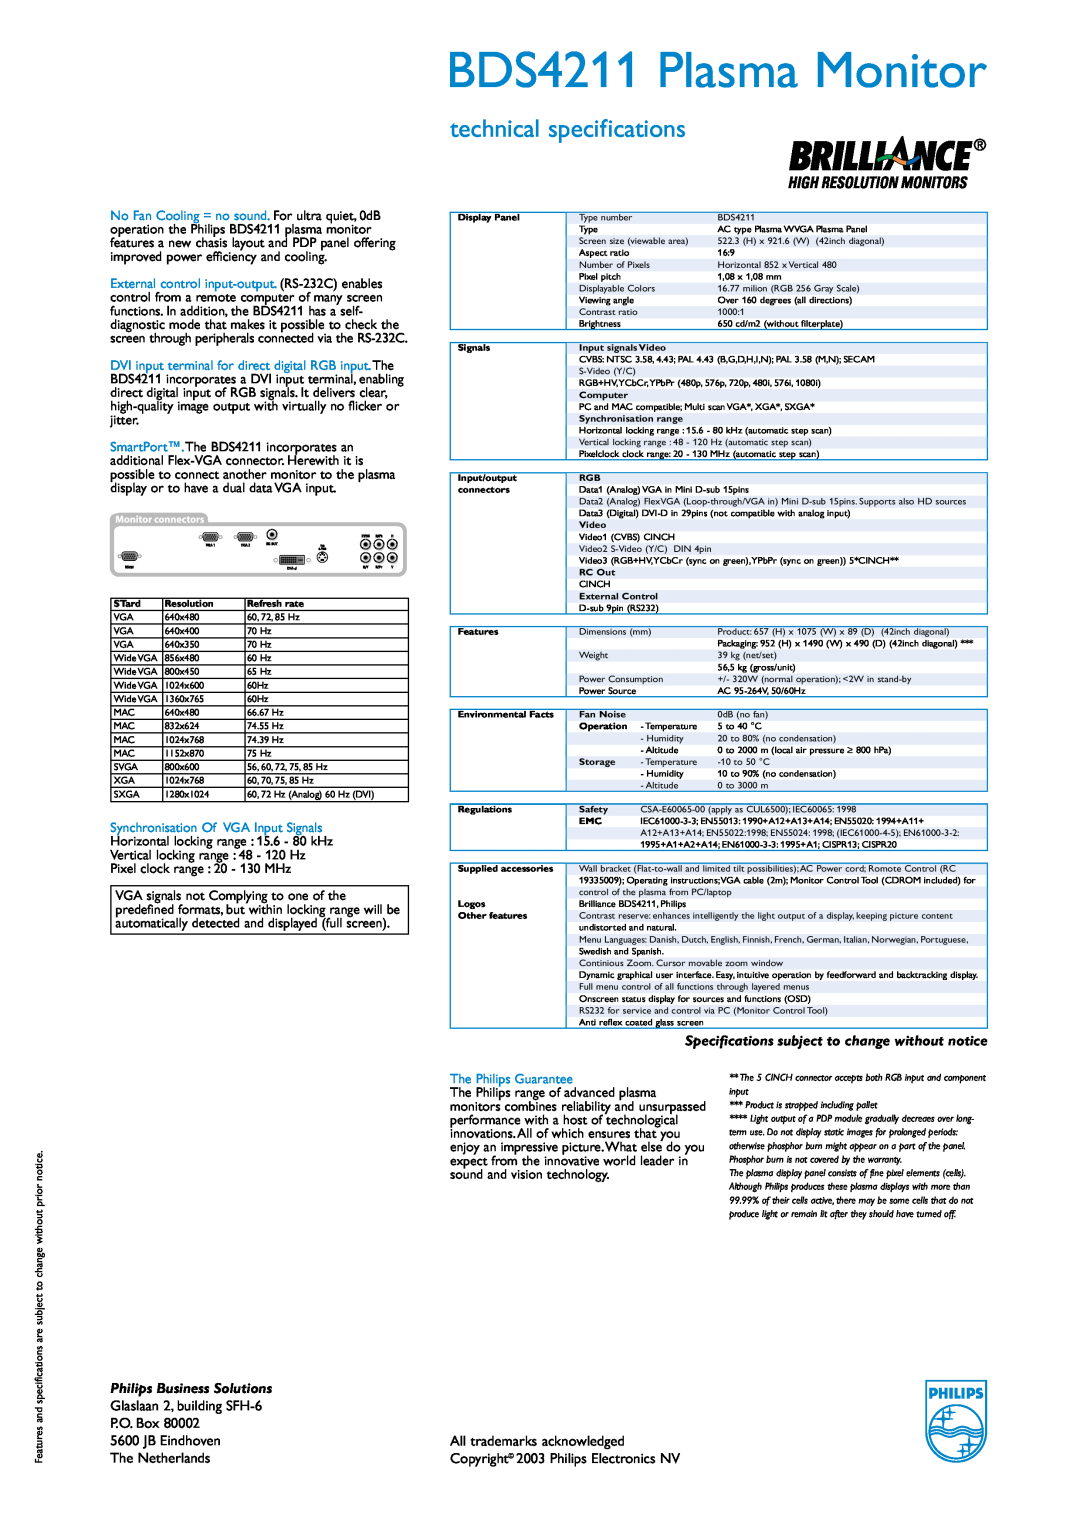 Philips BDS4211 Plasma Monitor, technical specifications, Specifications subject to change without notice, P.O. Box 